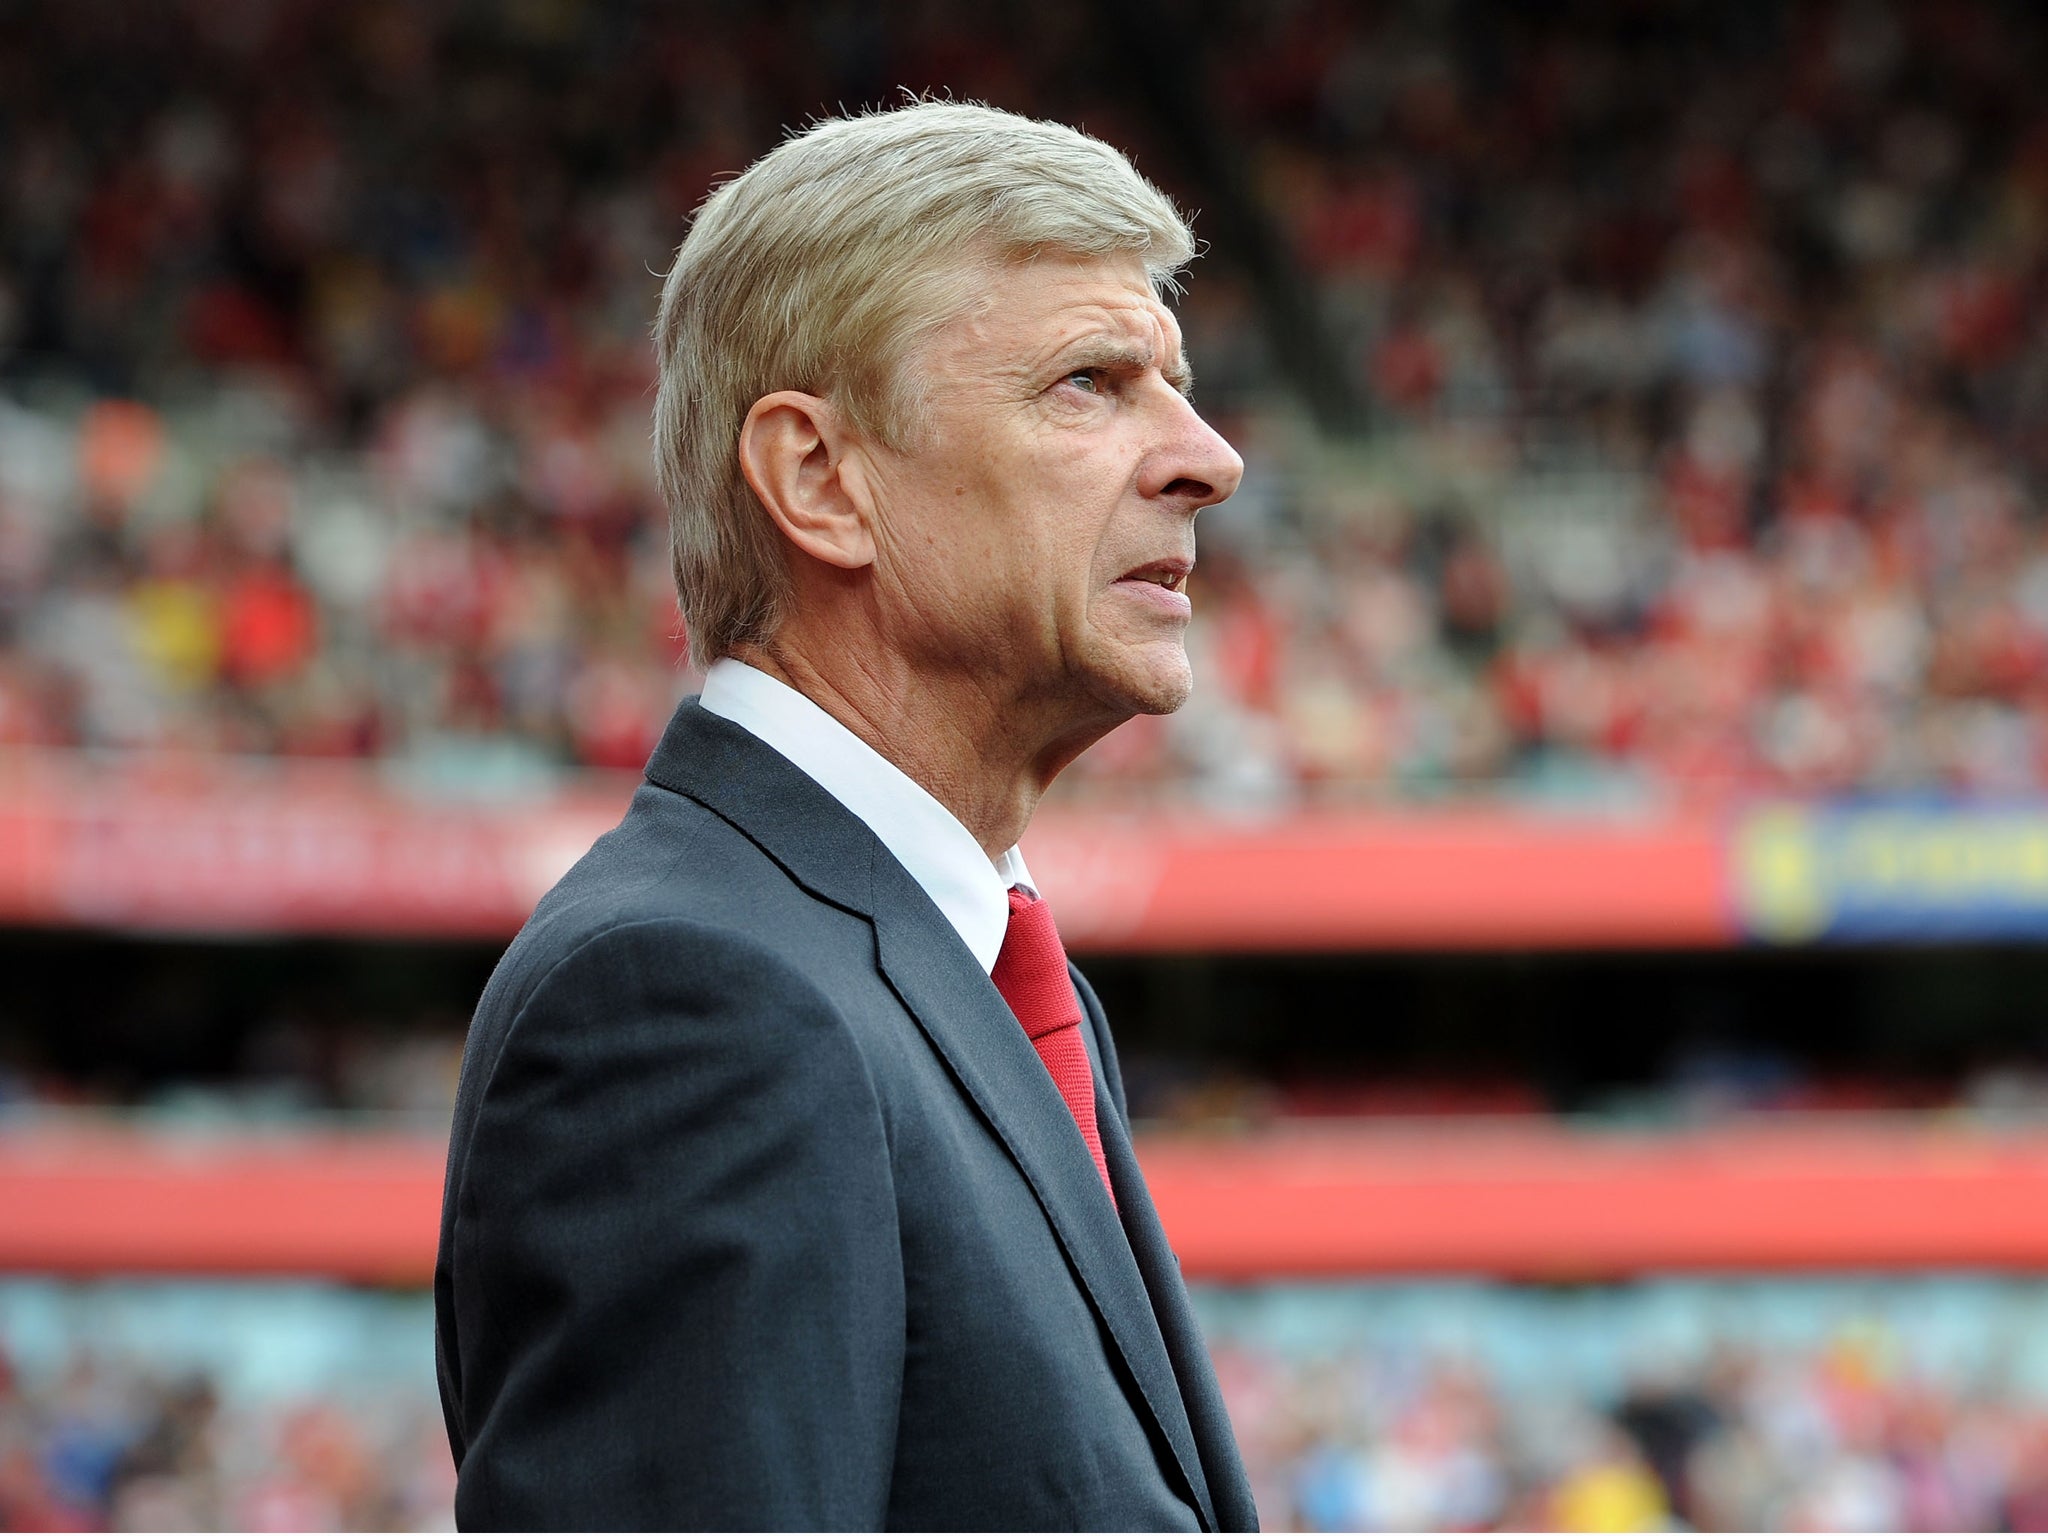 Arsene Wenger has admitted he would like to extend his contract with Arsenal